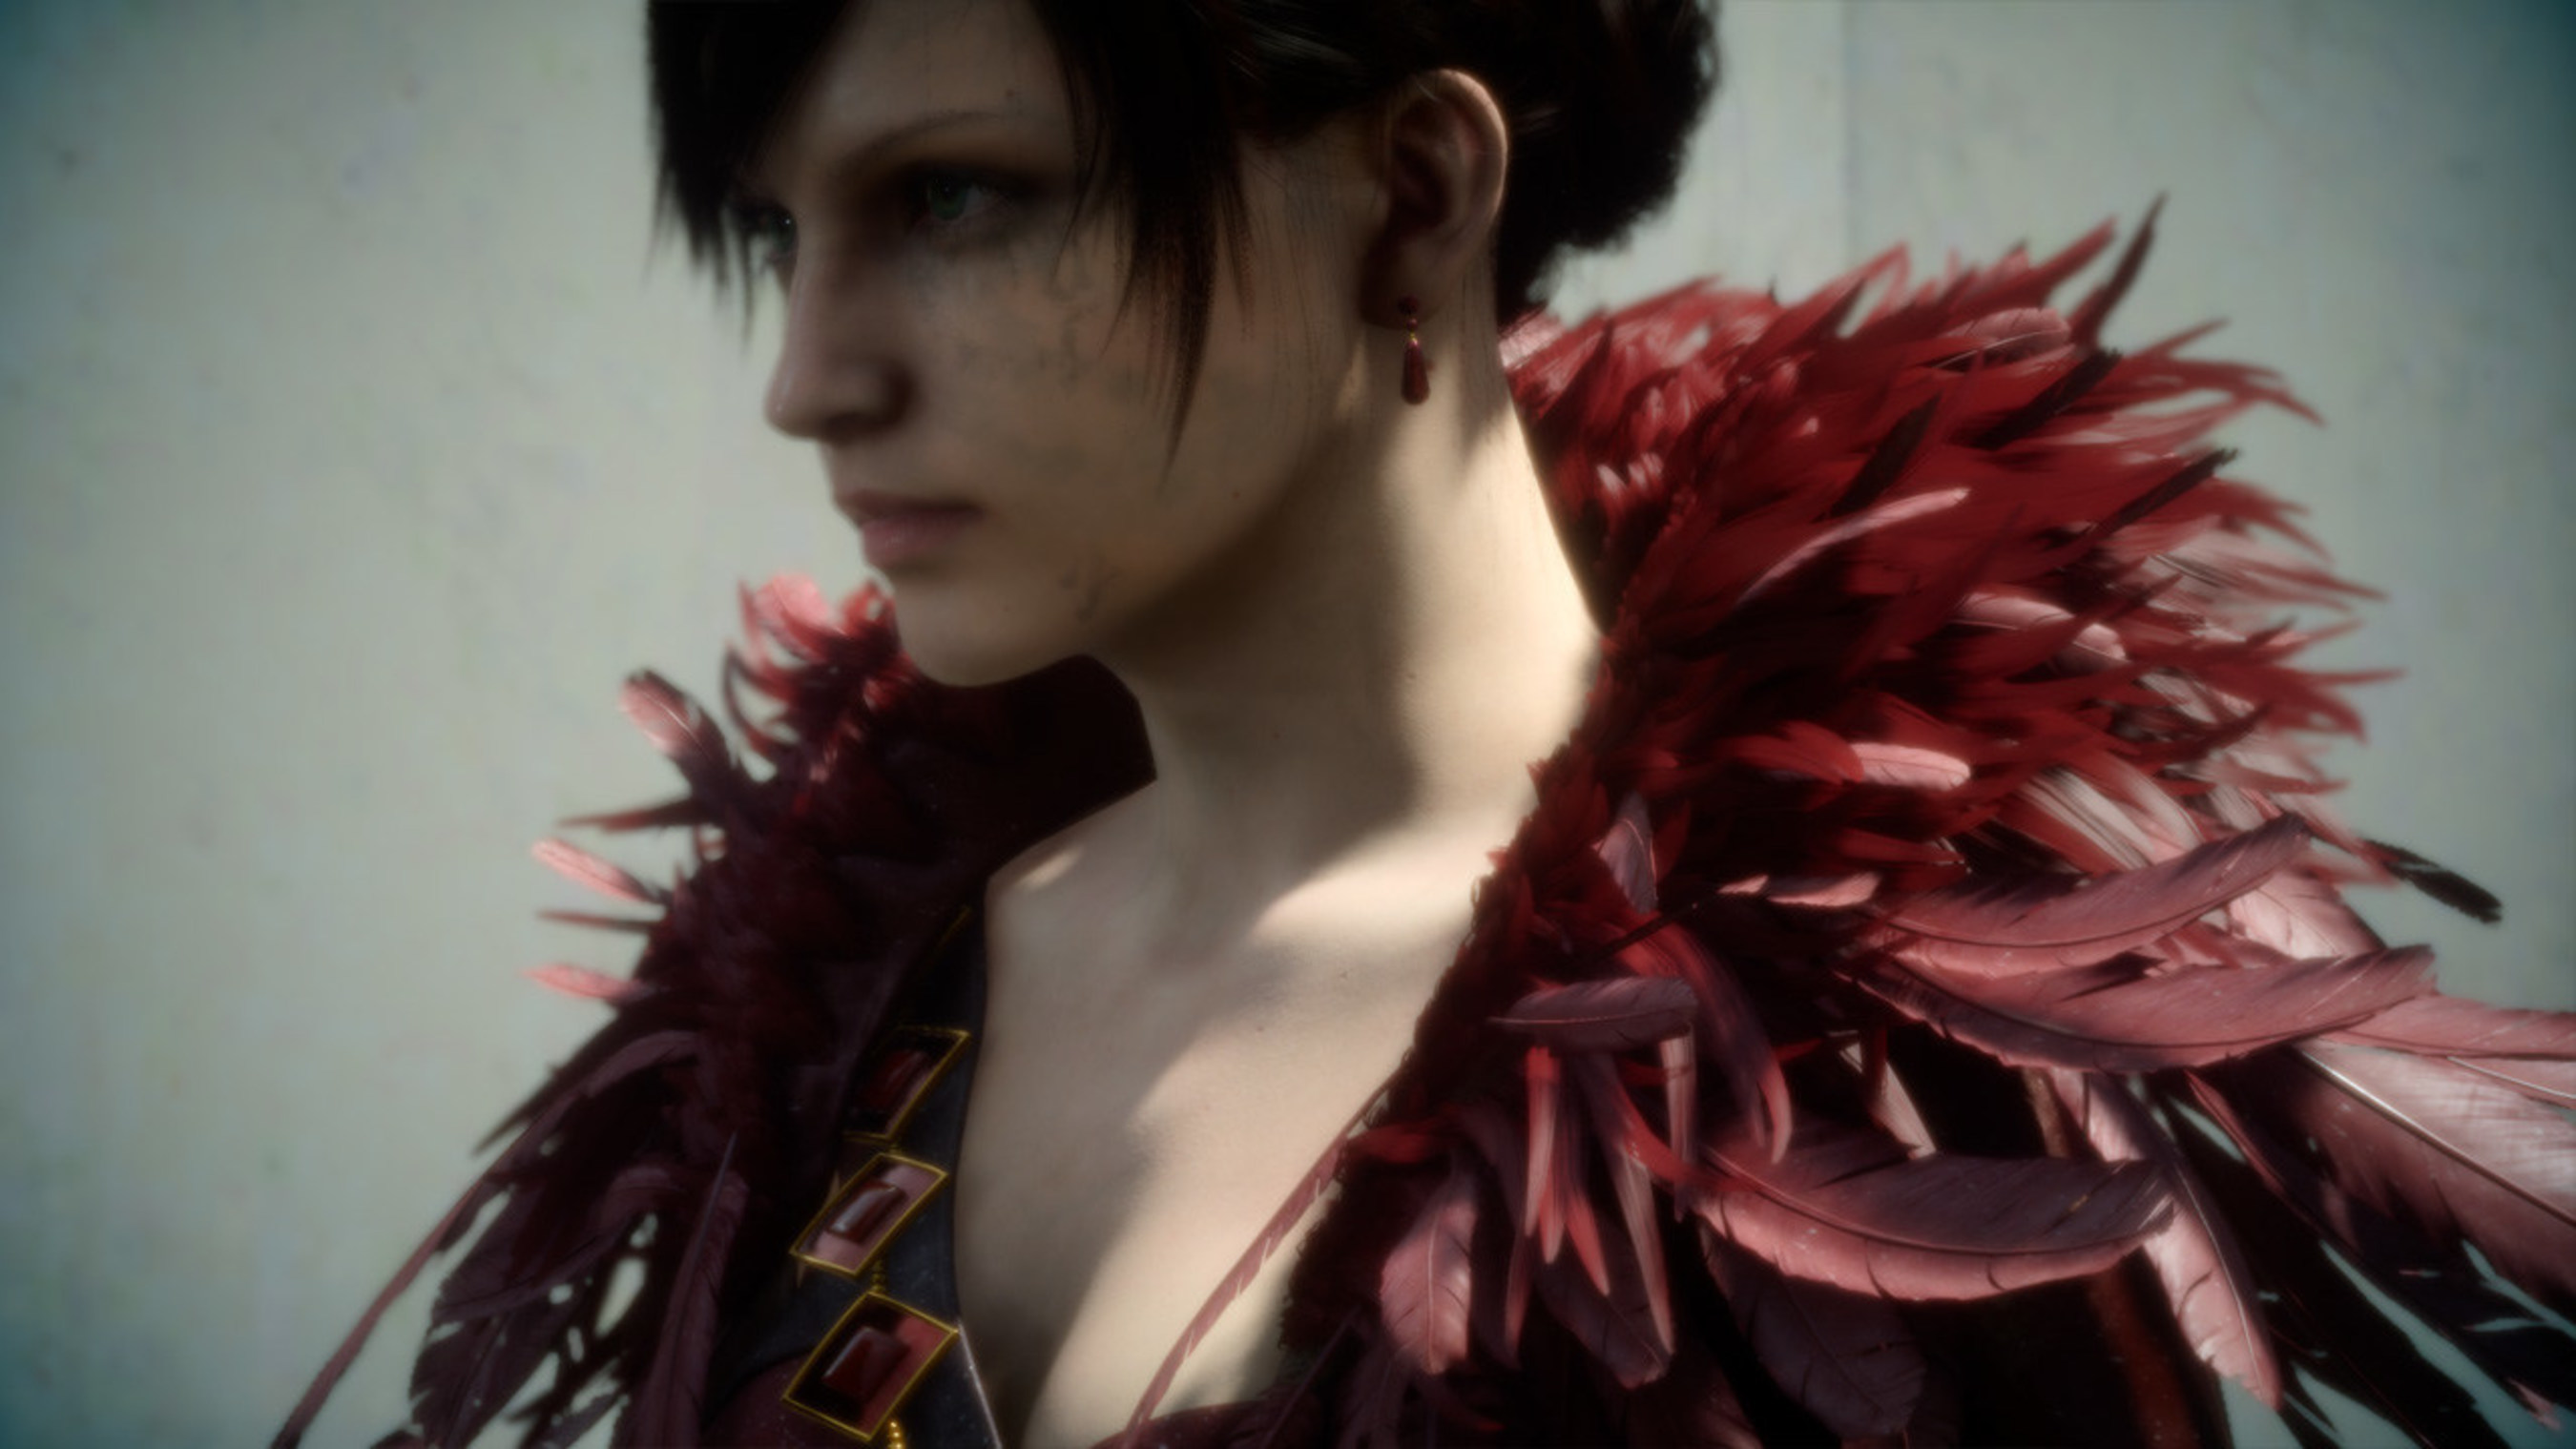 (C)2015 SQUARE ENIX CO., LTD. All Rights Reserved.